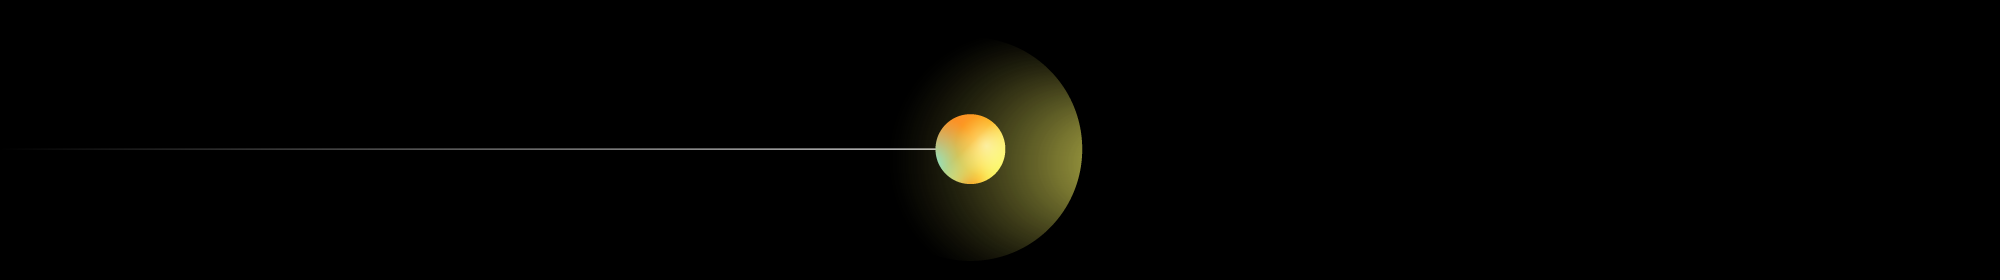 Adlucent yellow Orb moving from the left to right.